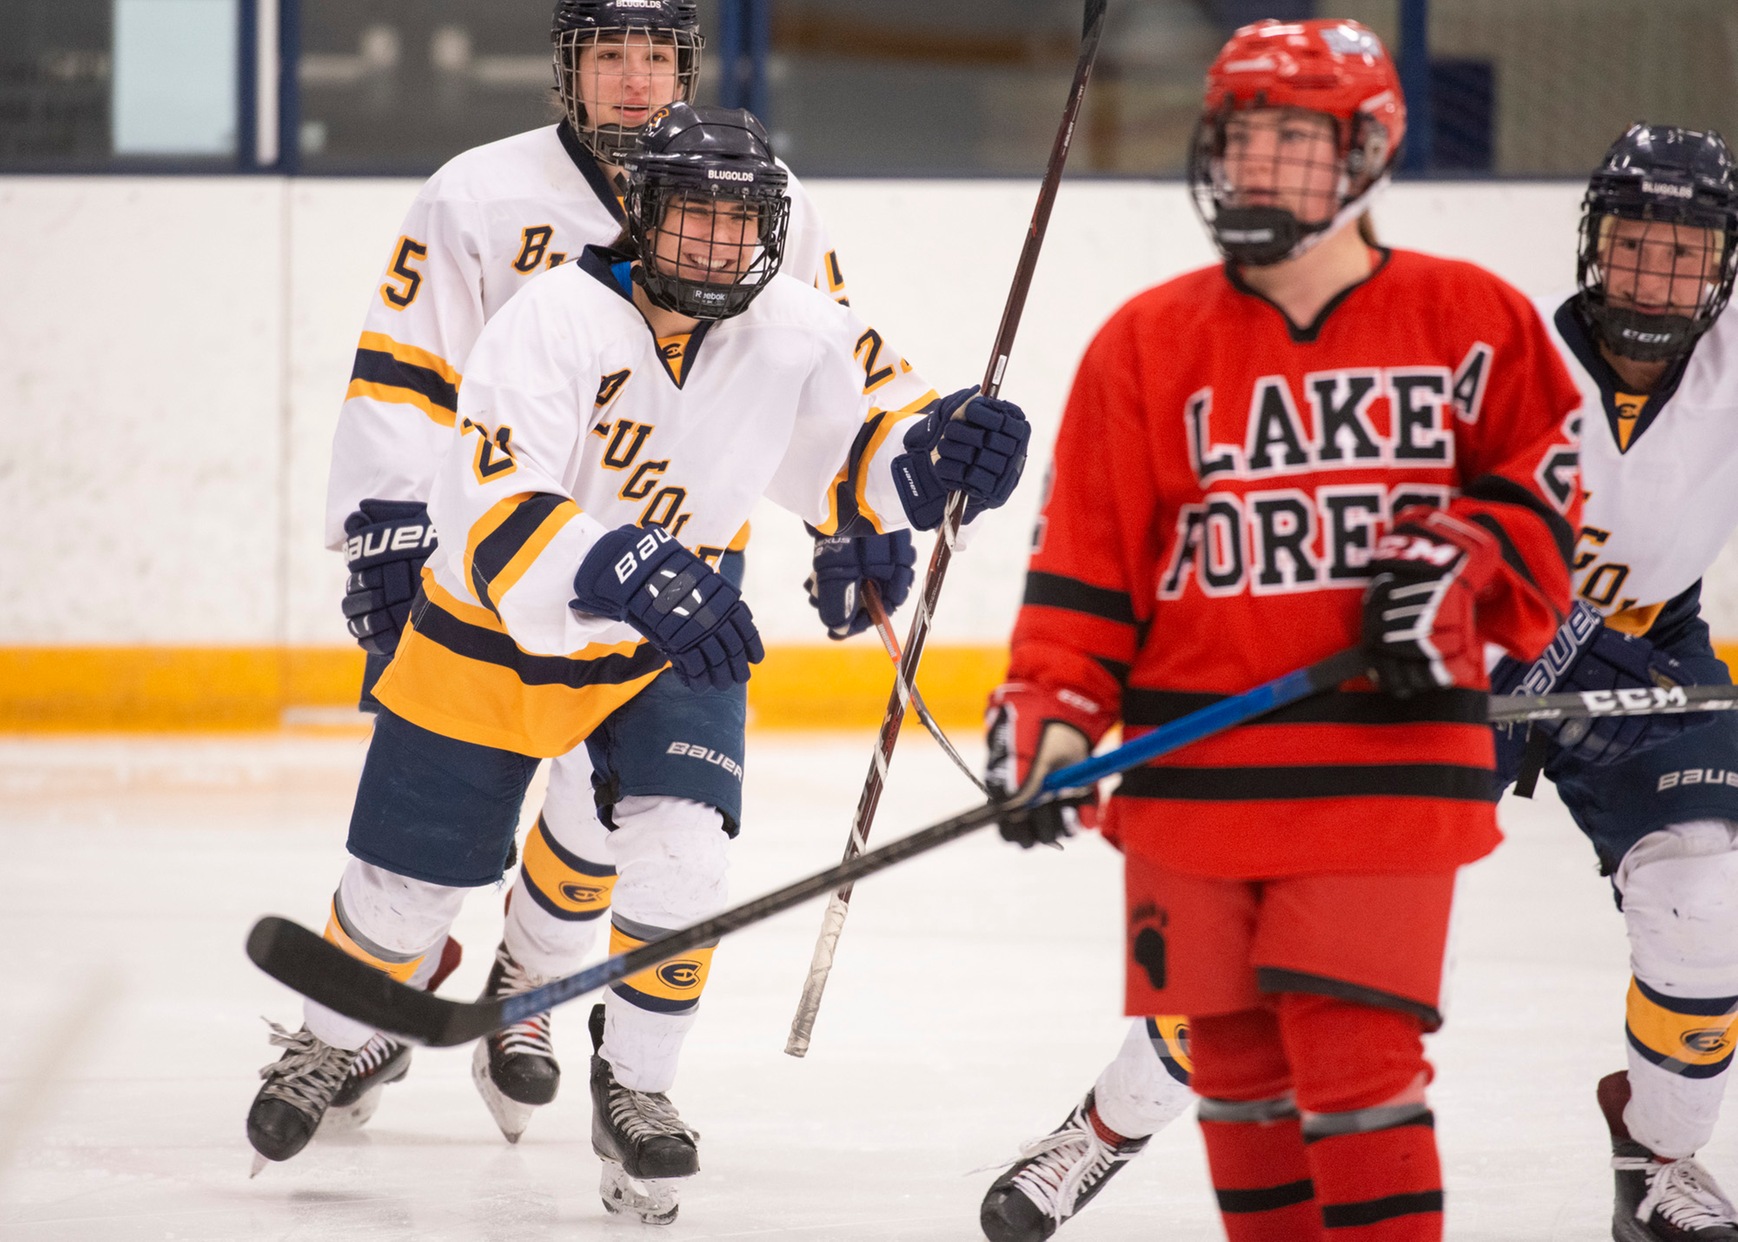 Women's Hockey tallies 6-1 win over Lake Forest